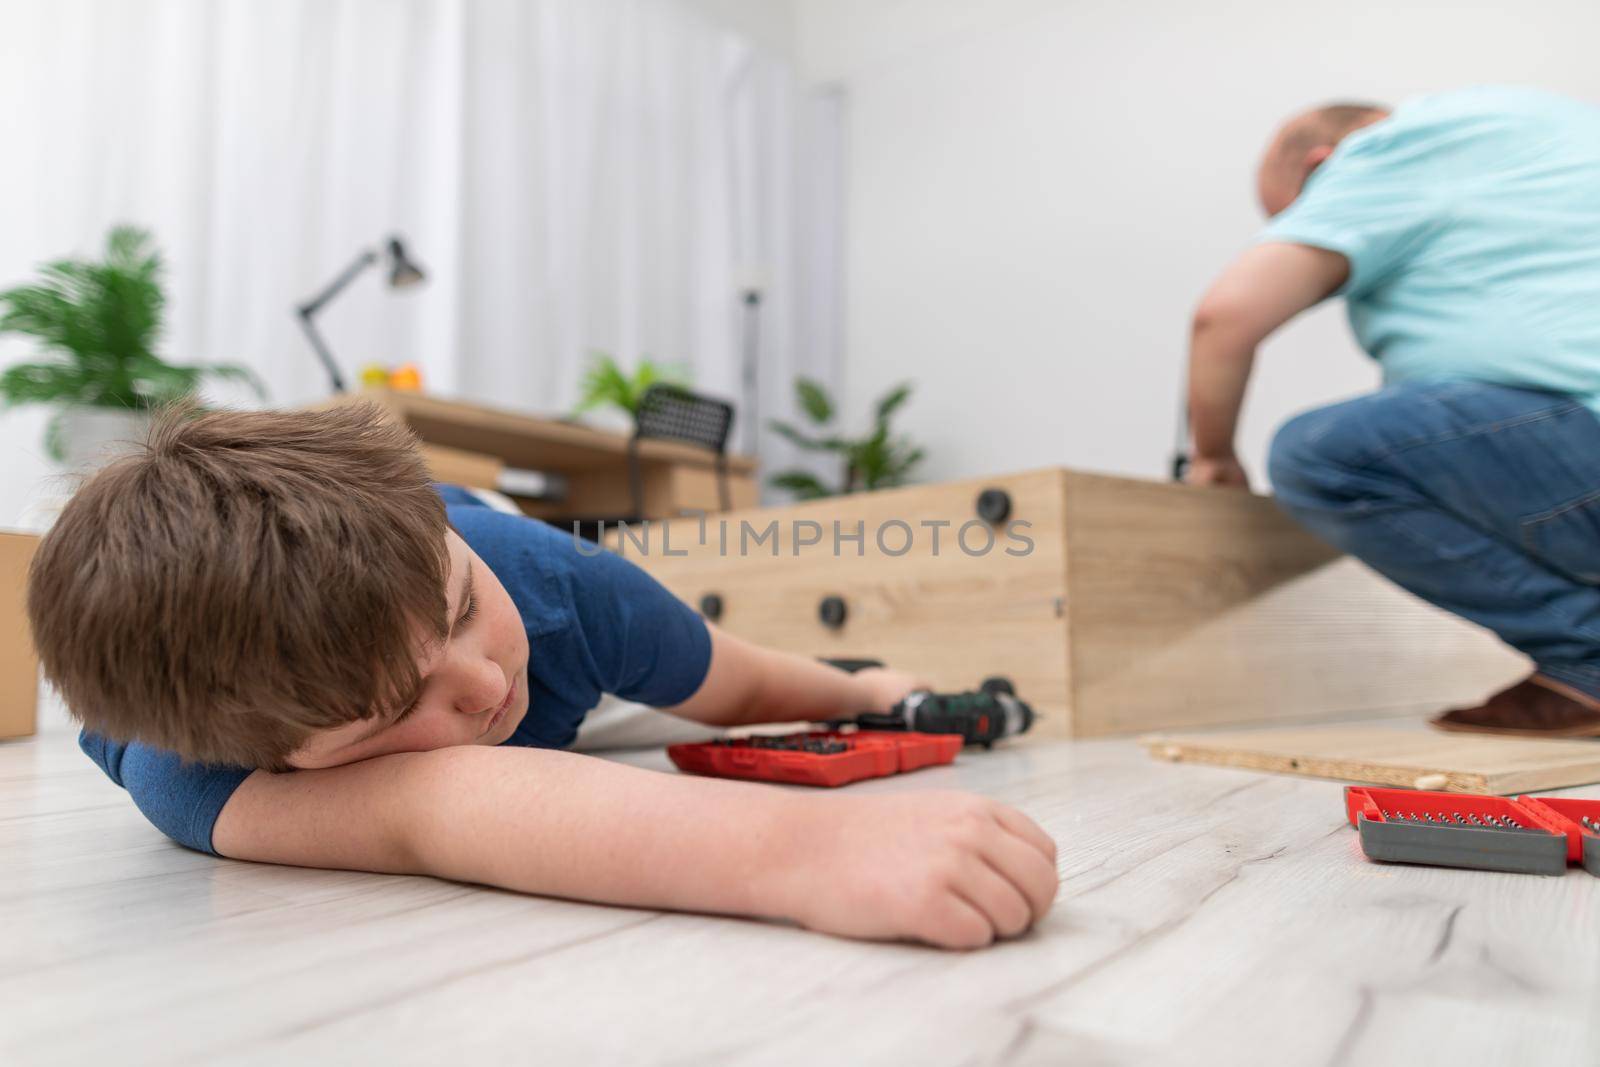 The son fell asleep from exhaustion and the father persistently continues to twist furniture. Long and laborious work during the assembly of furniture.